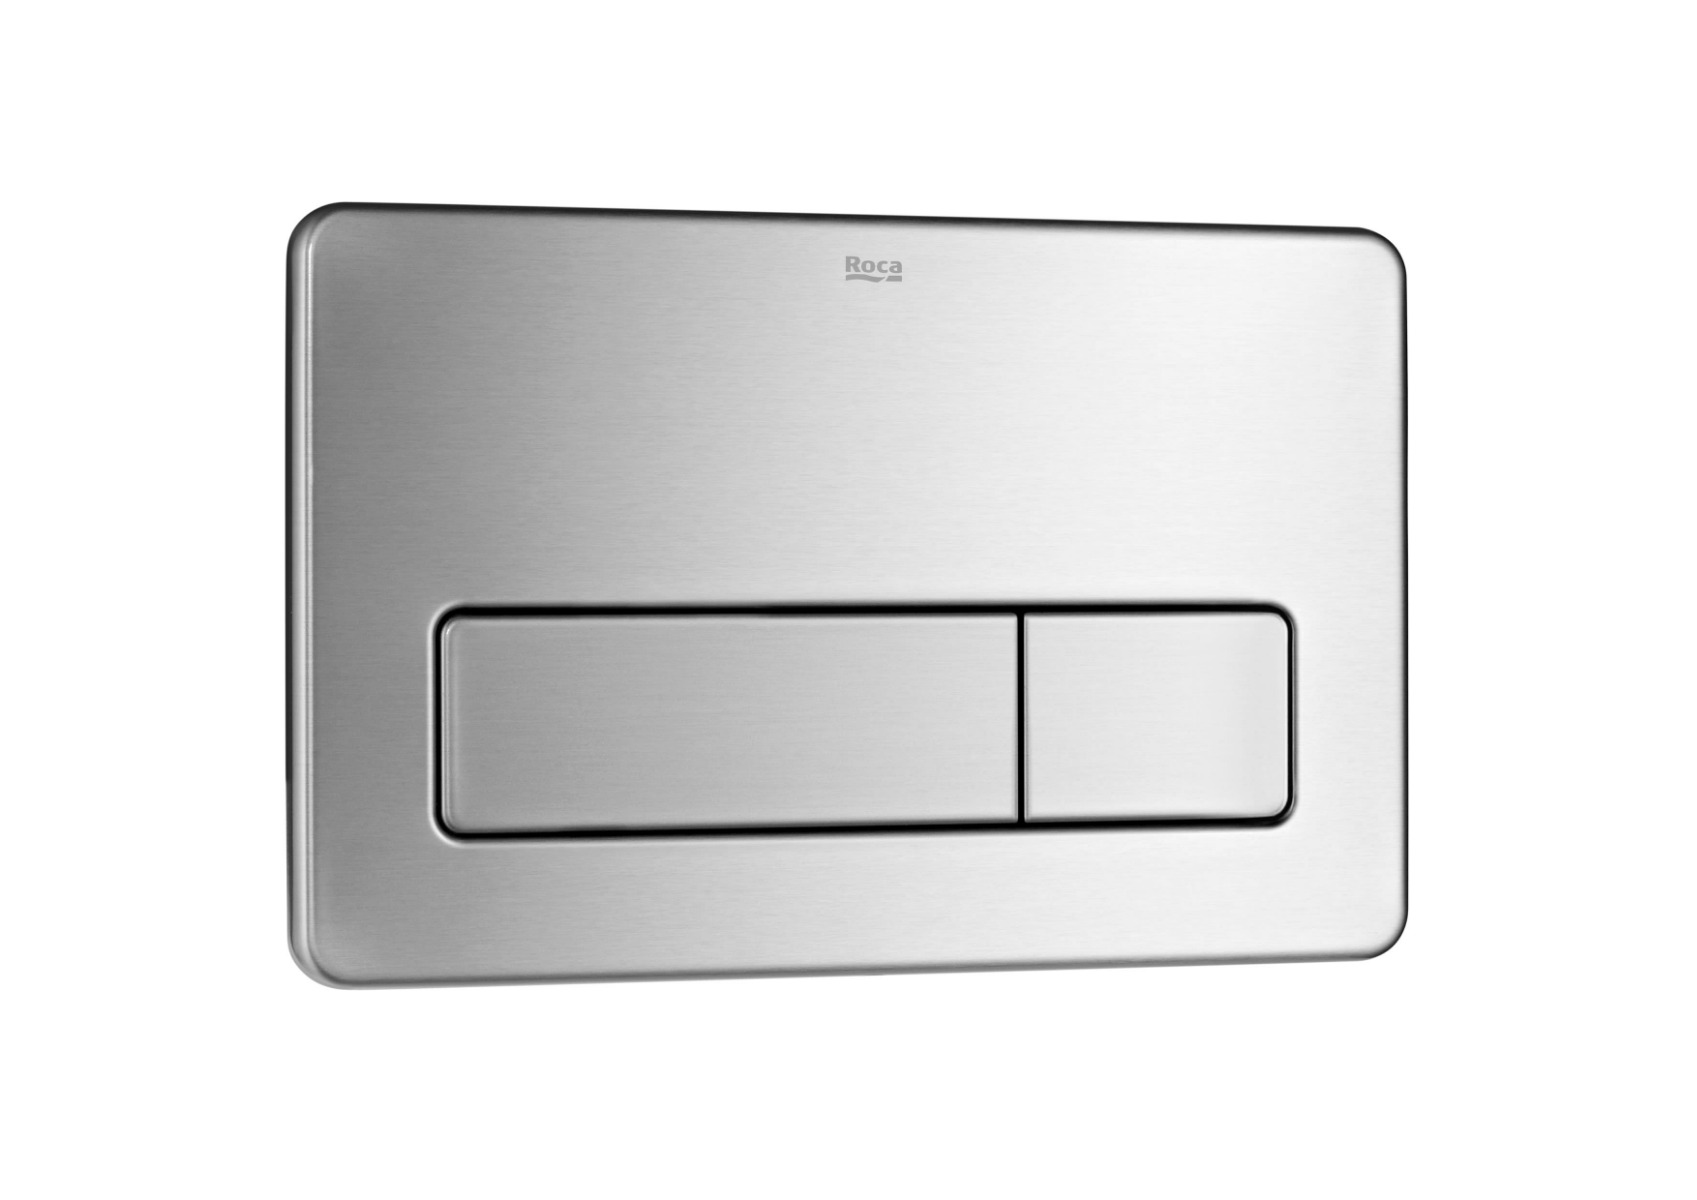 PL3 PRO DUAL - Vandal-proof stainless steel dual flush operating plate for concealed cistern